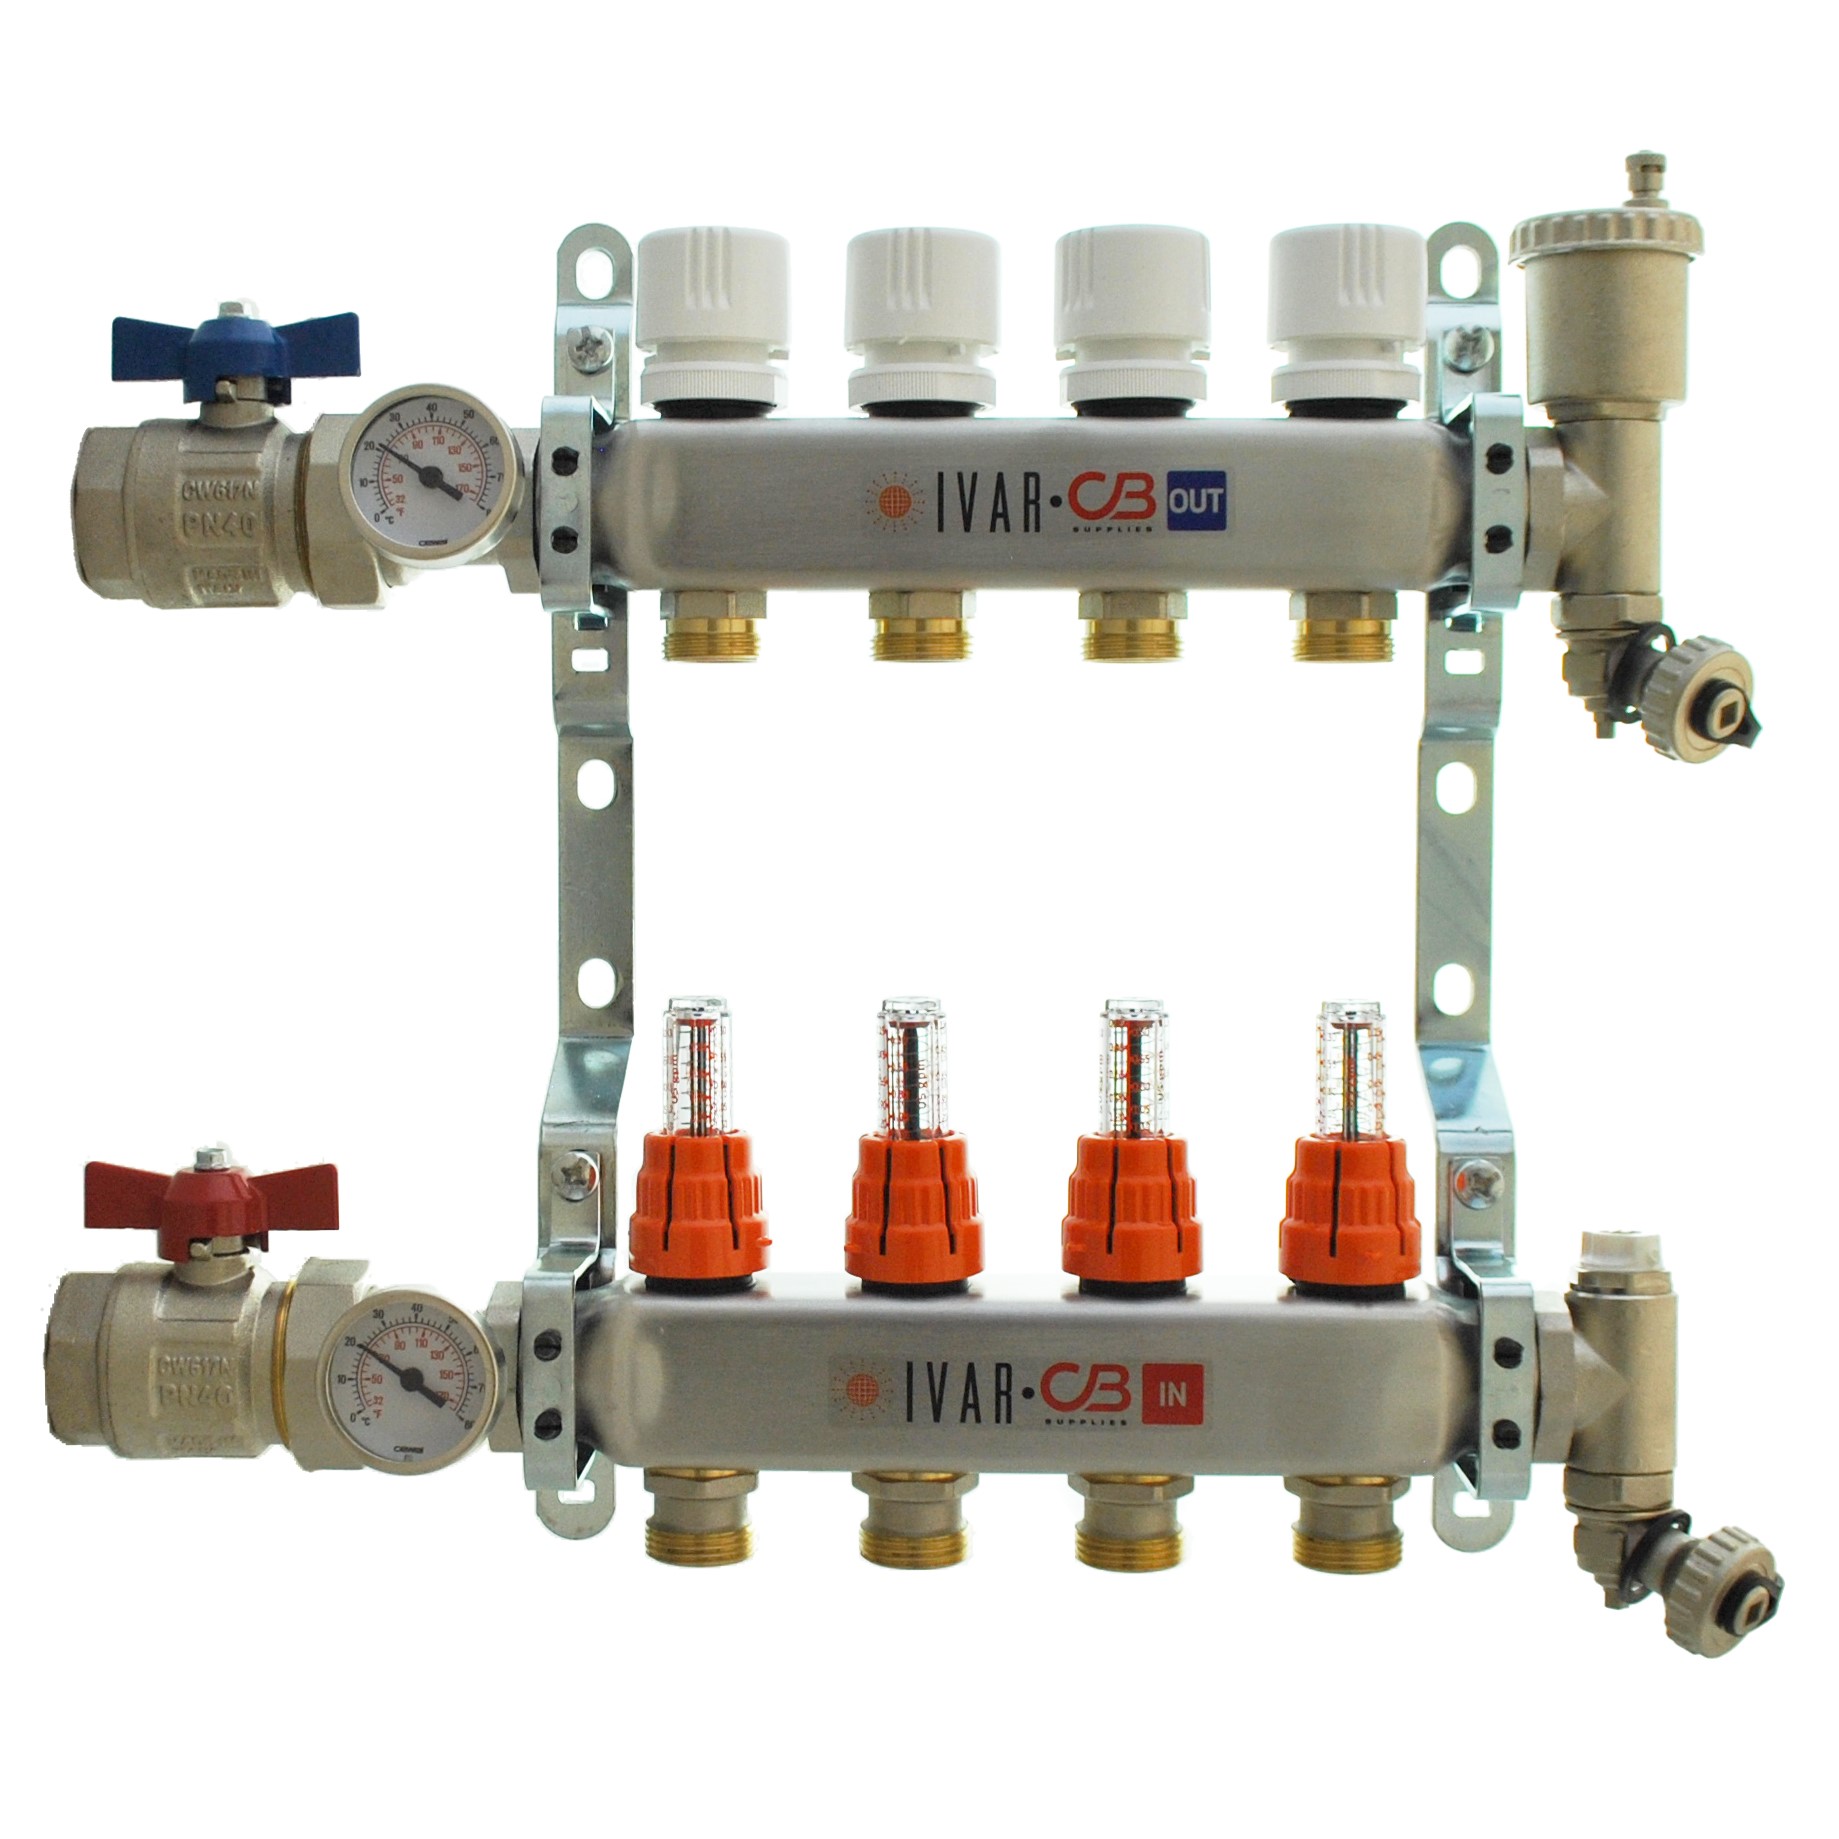 1" IVAR Stainless Steel Hydronic Manifold for Radiant Floor Heating - 4 ports